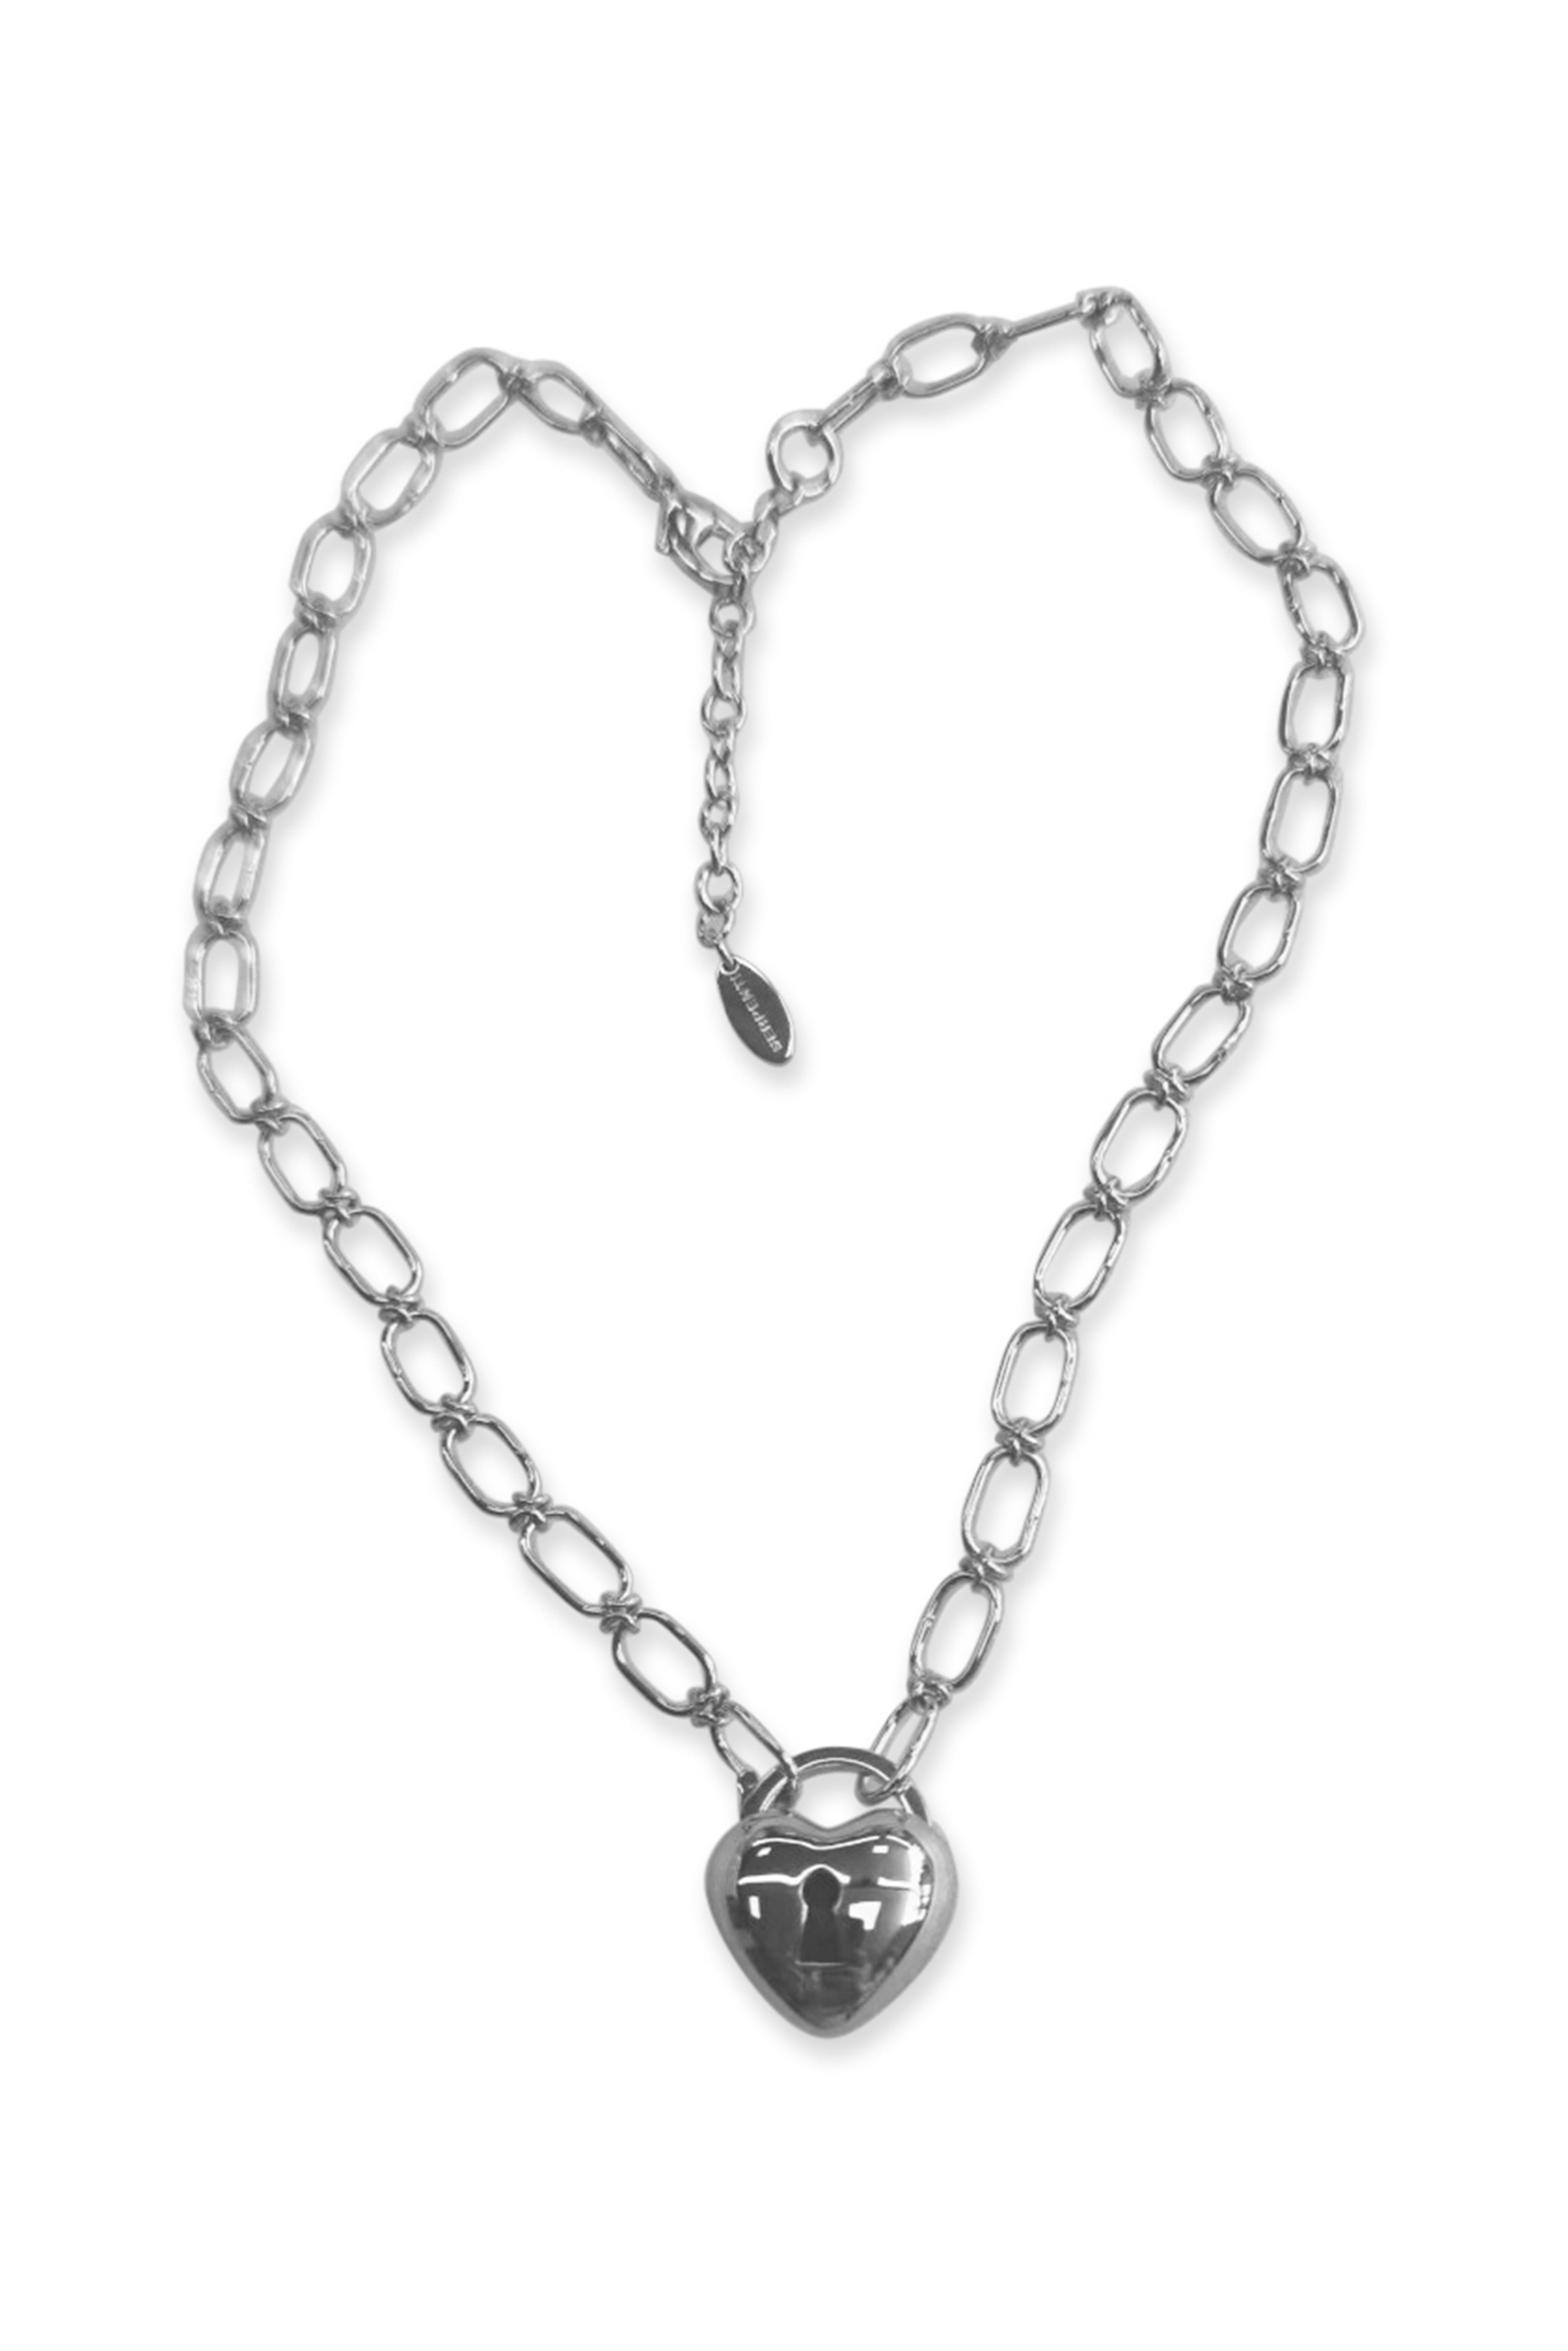 The Locket Charm Necklace